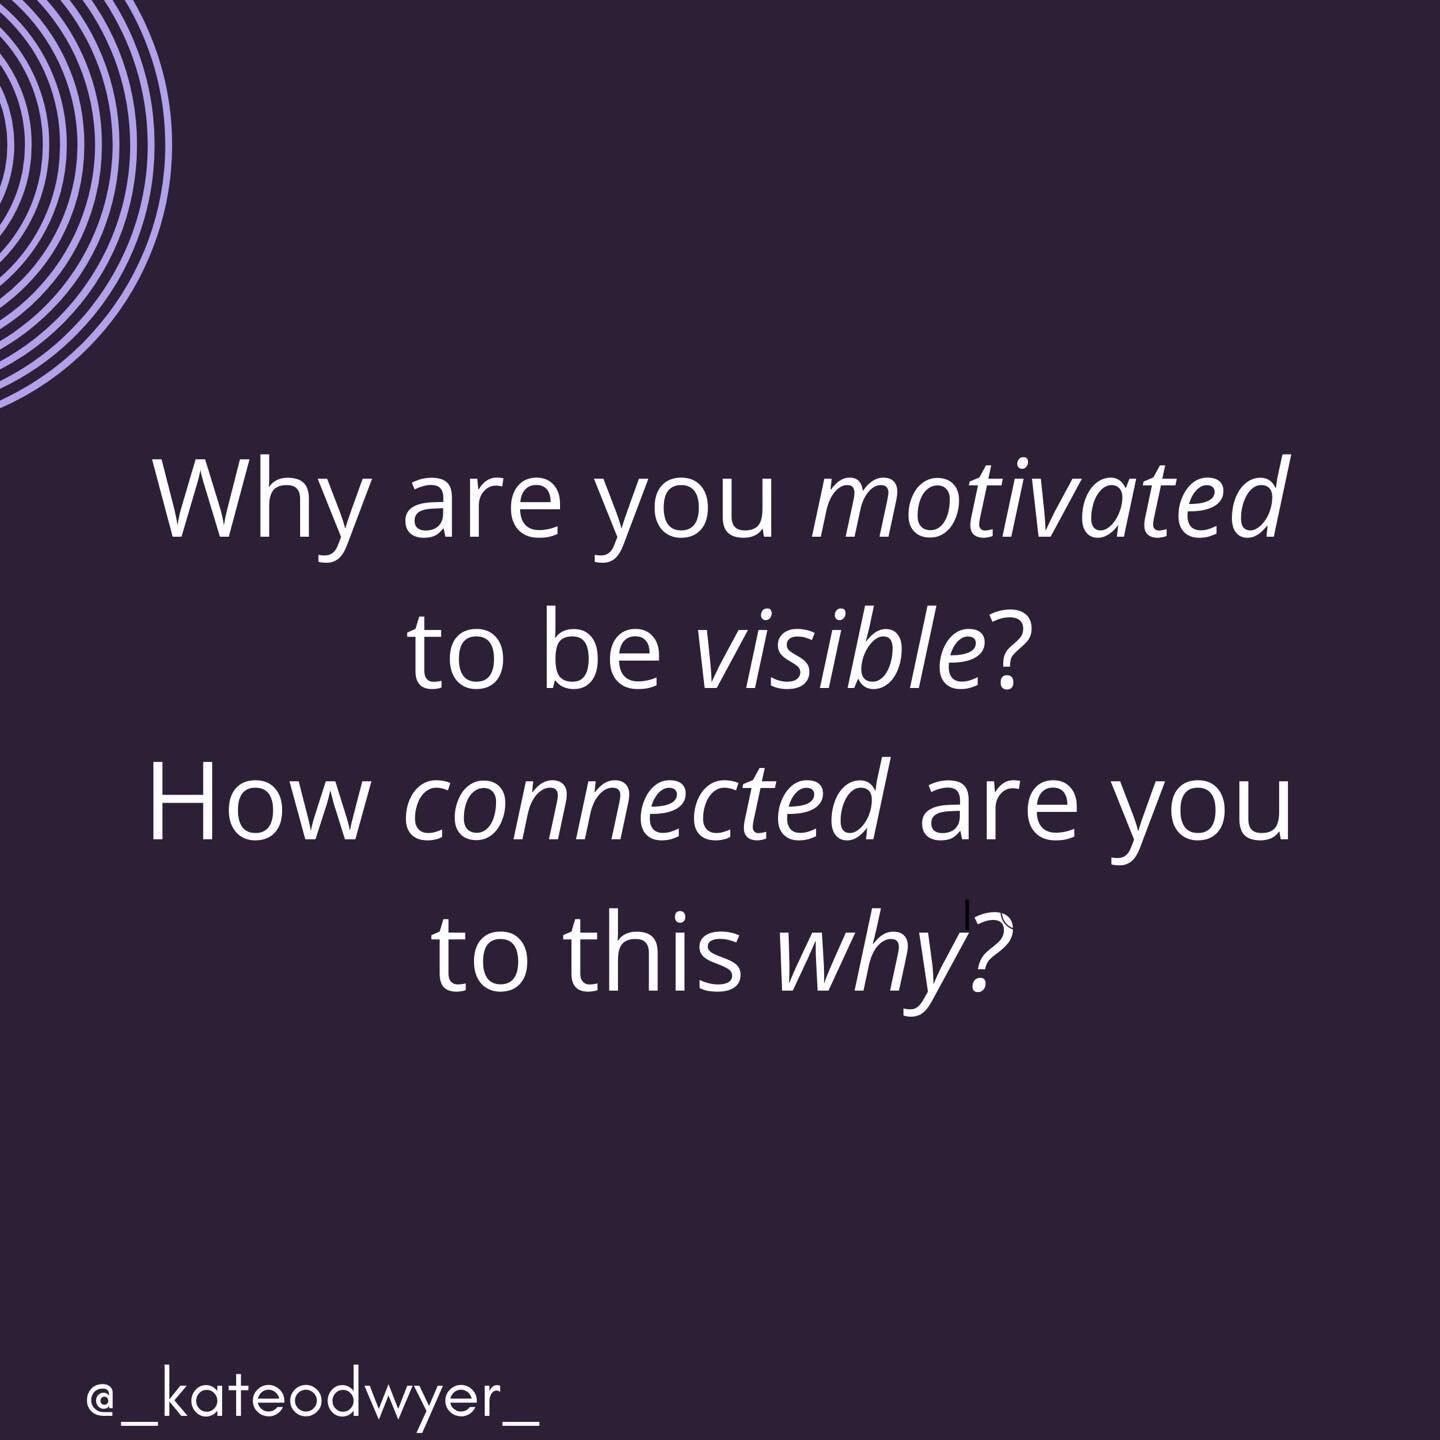 WHAT&rsquo;S YOUR WHY? 

Do you want to build a business? But why?
Do you want to share a message? But why?
Do you want to make and sell art? But why?
Do you want to design? But why?
Do you want to coach people? But why?

Do you want to be visible? B